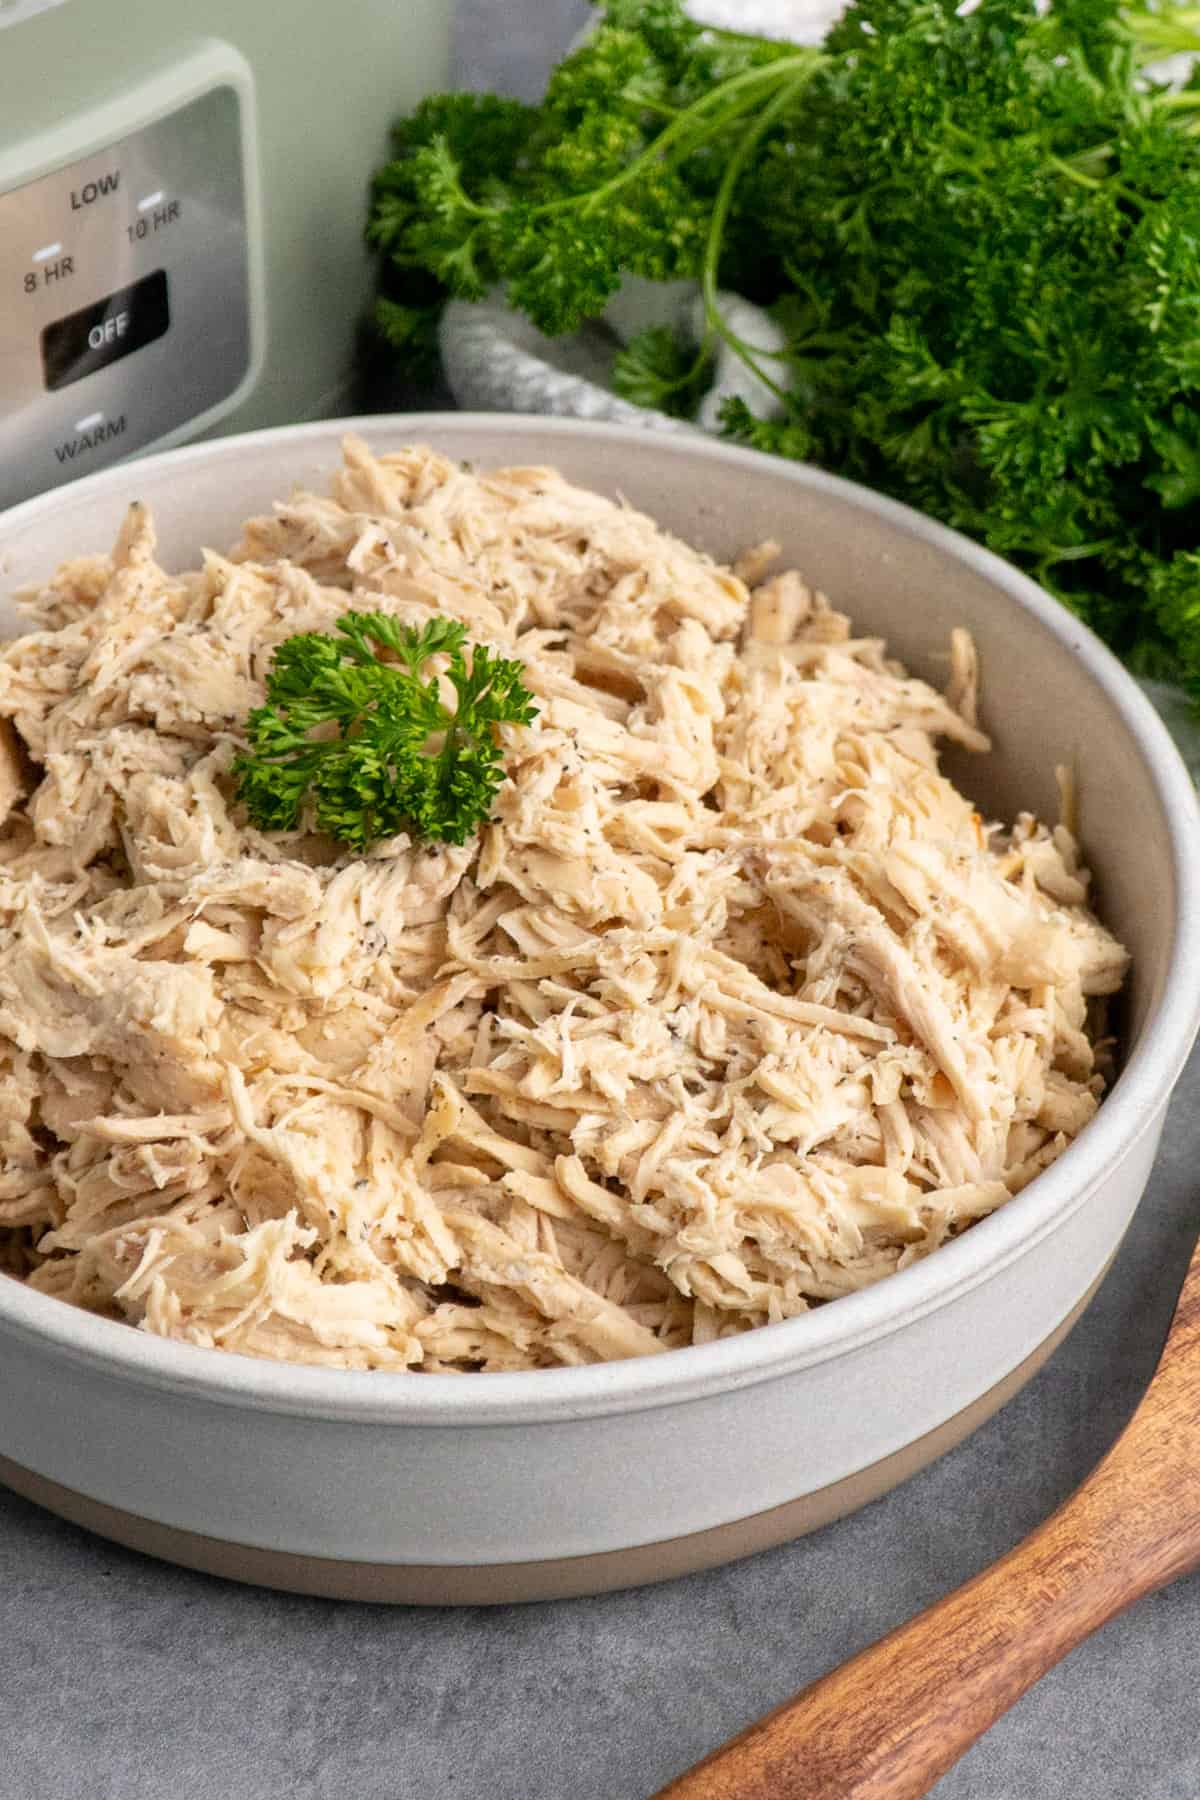 Crock Pot shredded chicken in a bowl garnished with parsley.